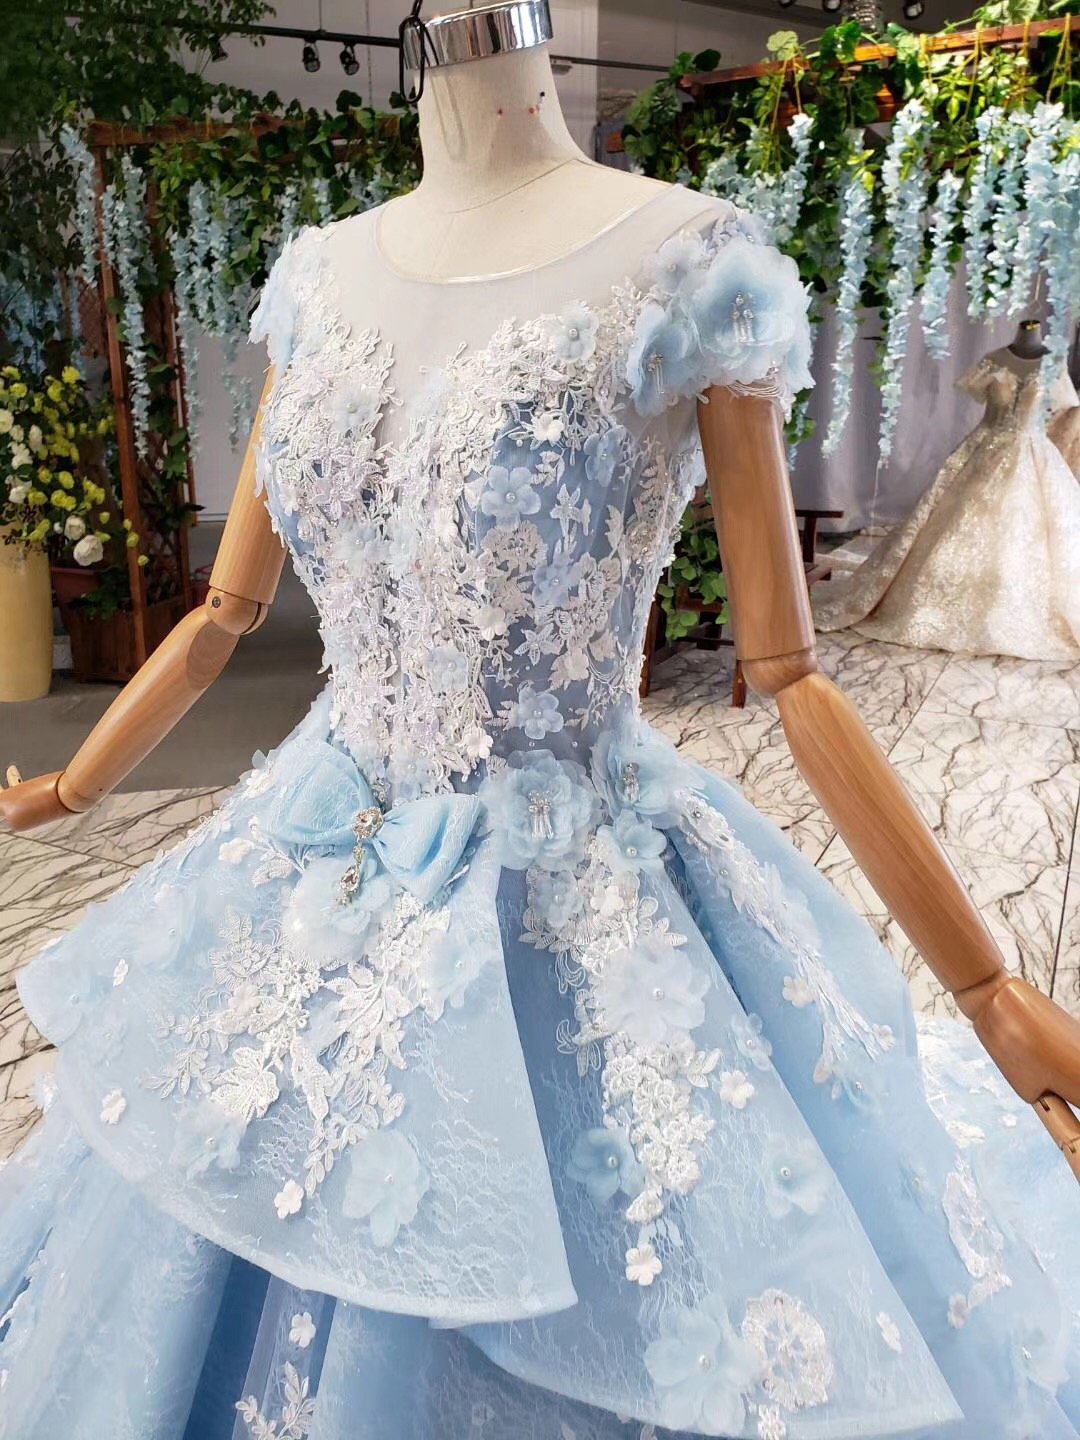 Princess Light Blue Ball Gown Cap Sleeve Prom Dresses with 3D Flowers Quinceanera Dress P1133